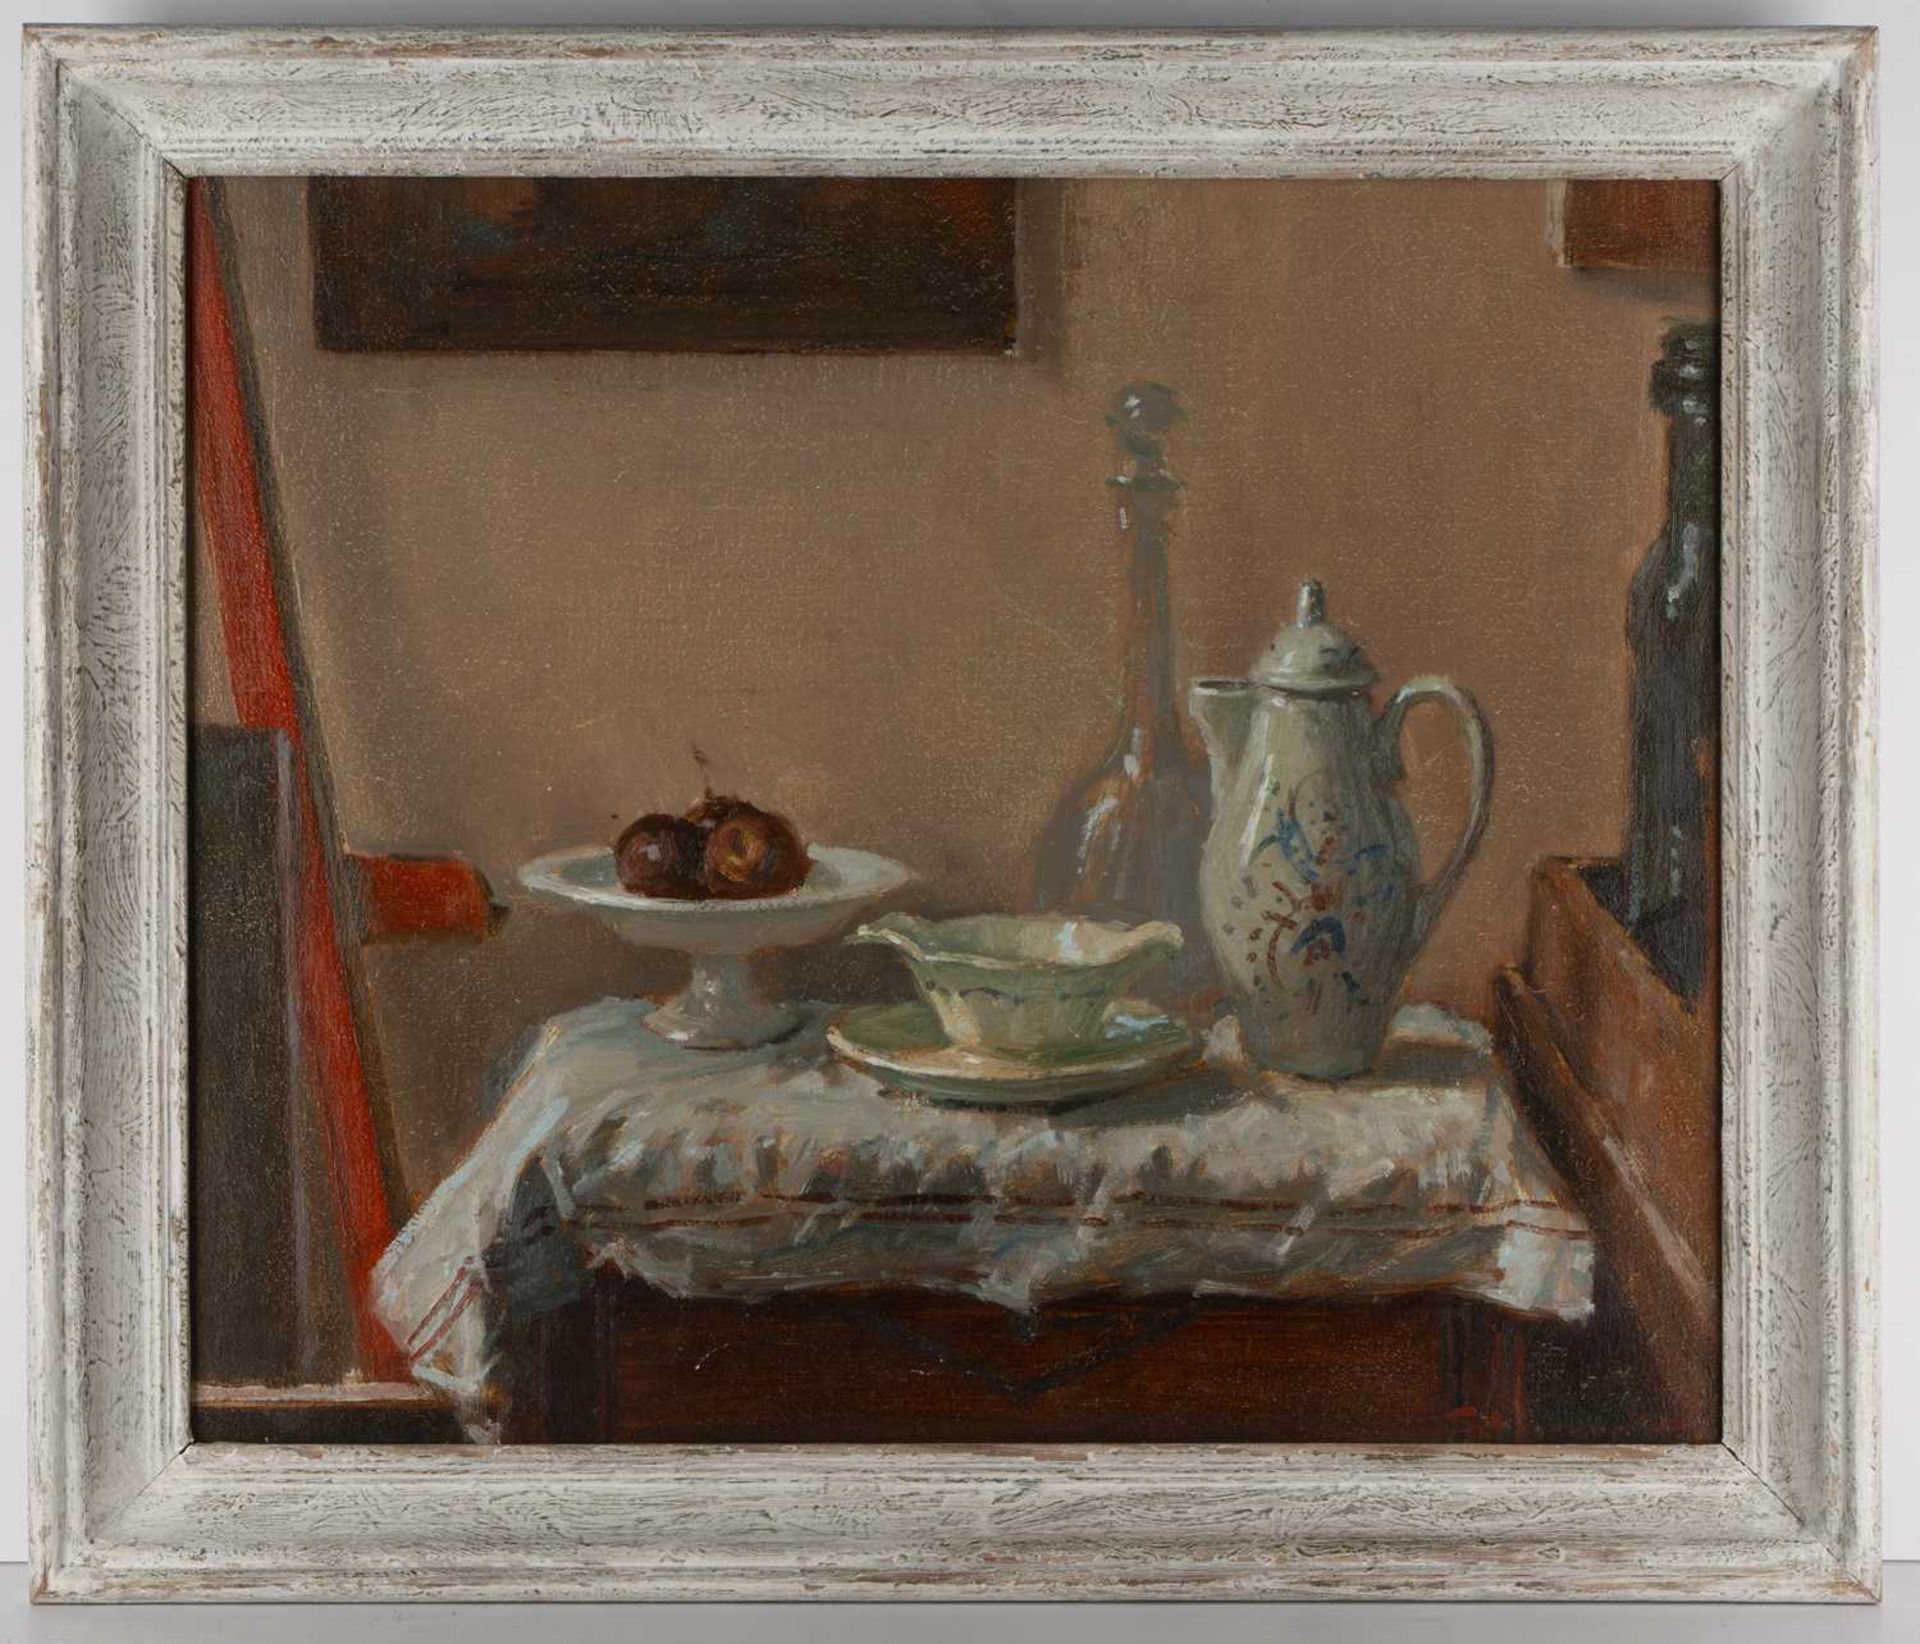 Shig***** (20th Century Continental School) 'Untitled still life table setting', oil on canvas, - Image 2 of 3